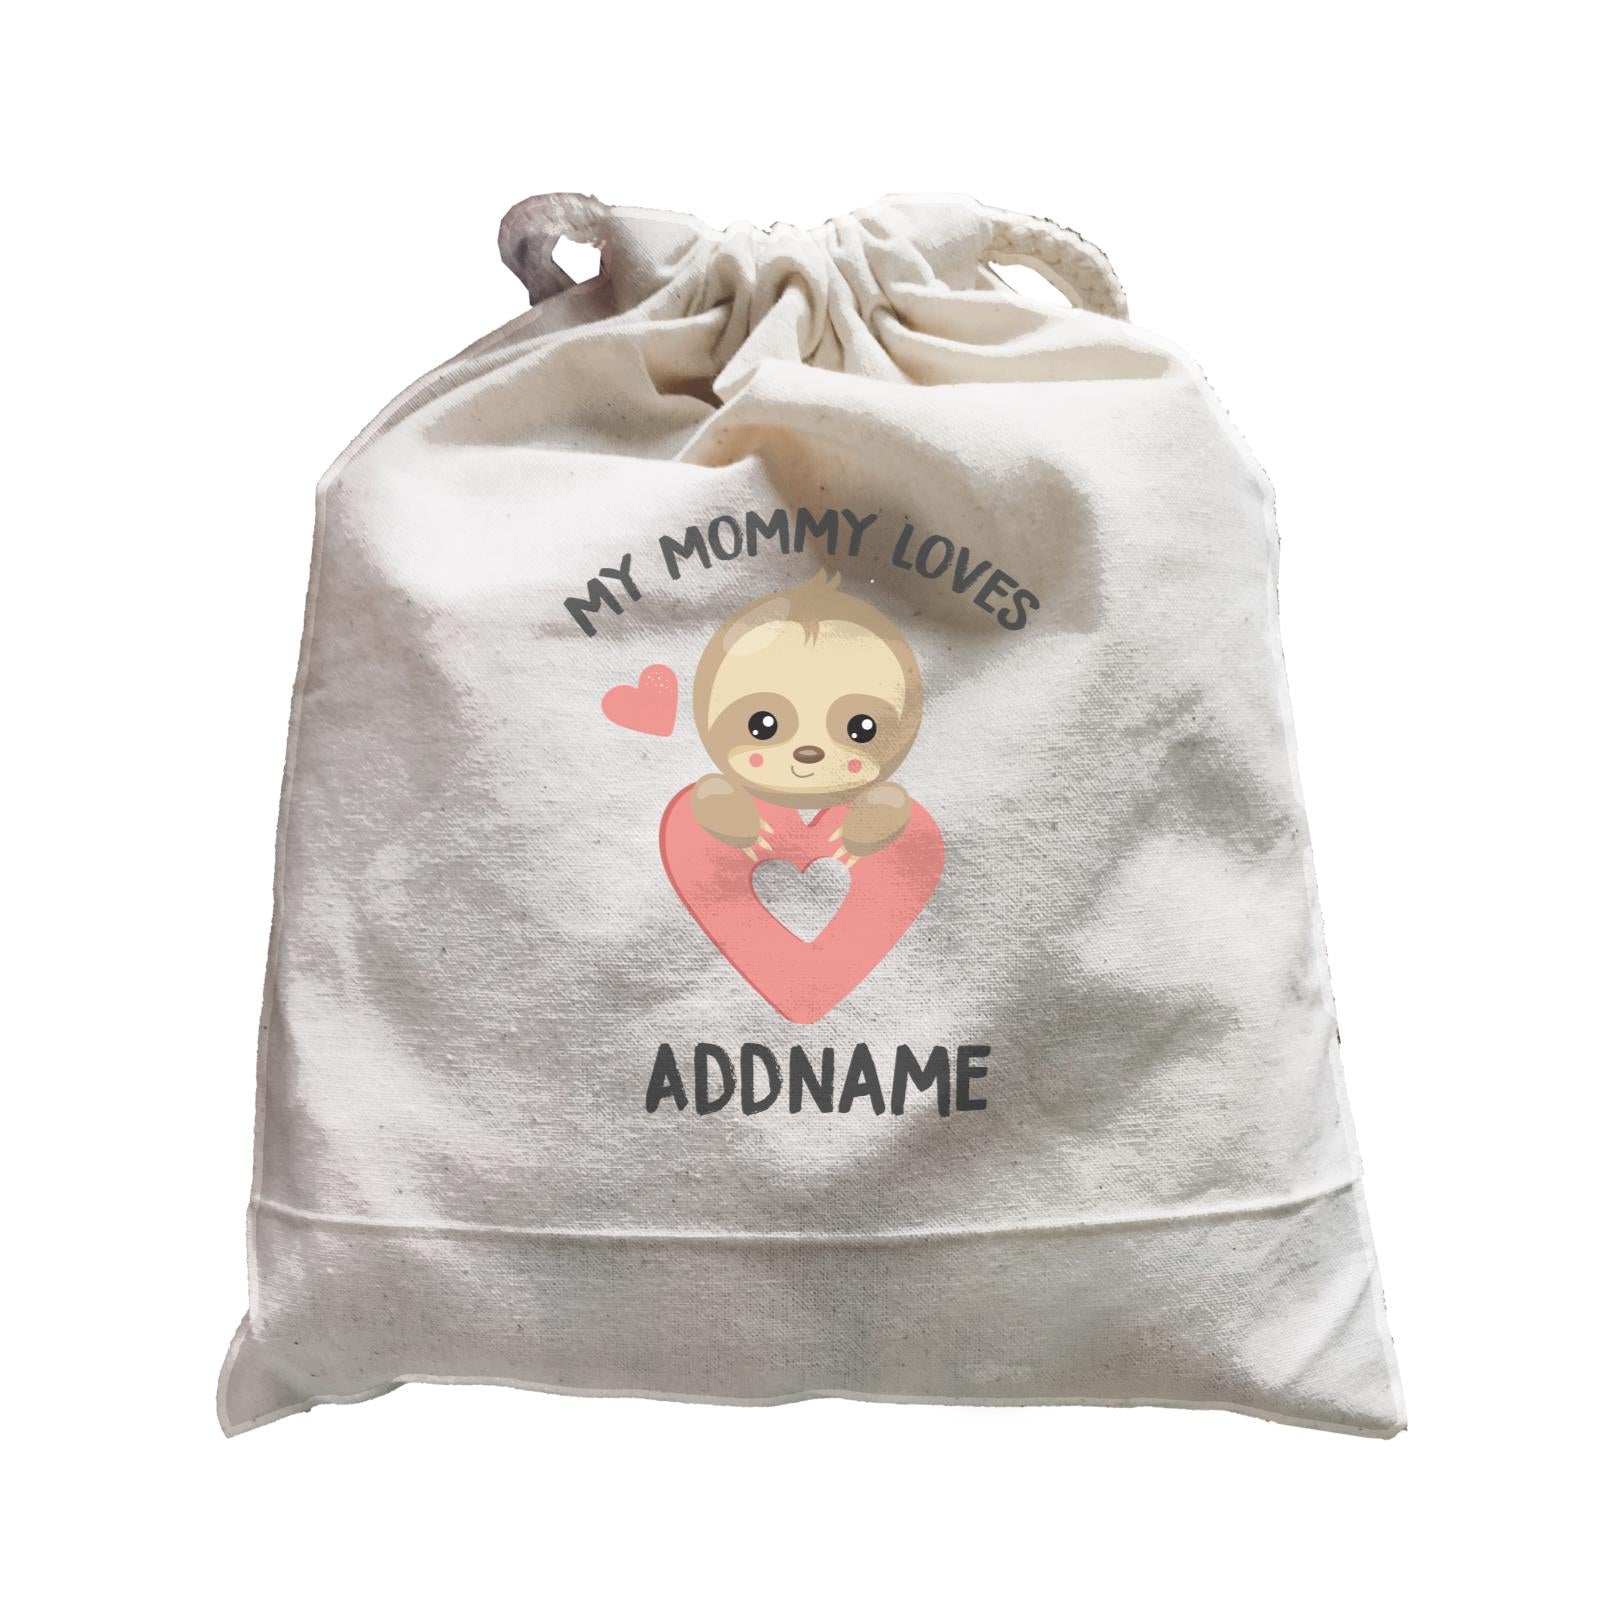 Cute Sloth My Mommy Loves Addname Satchel